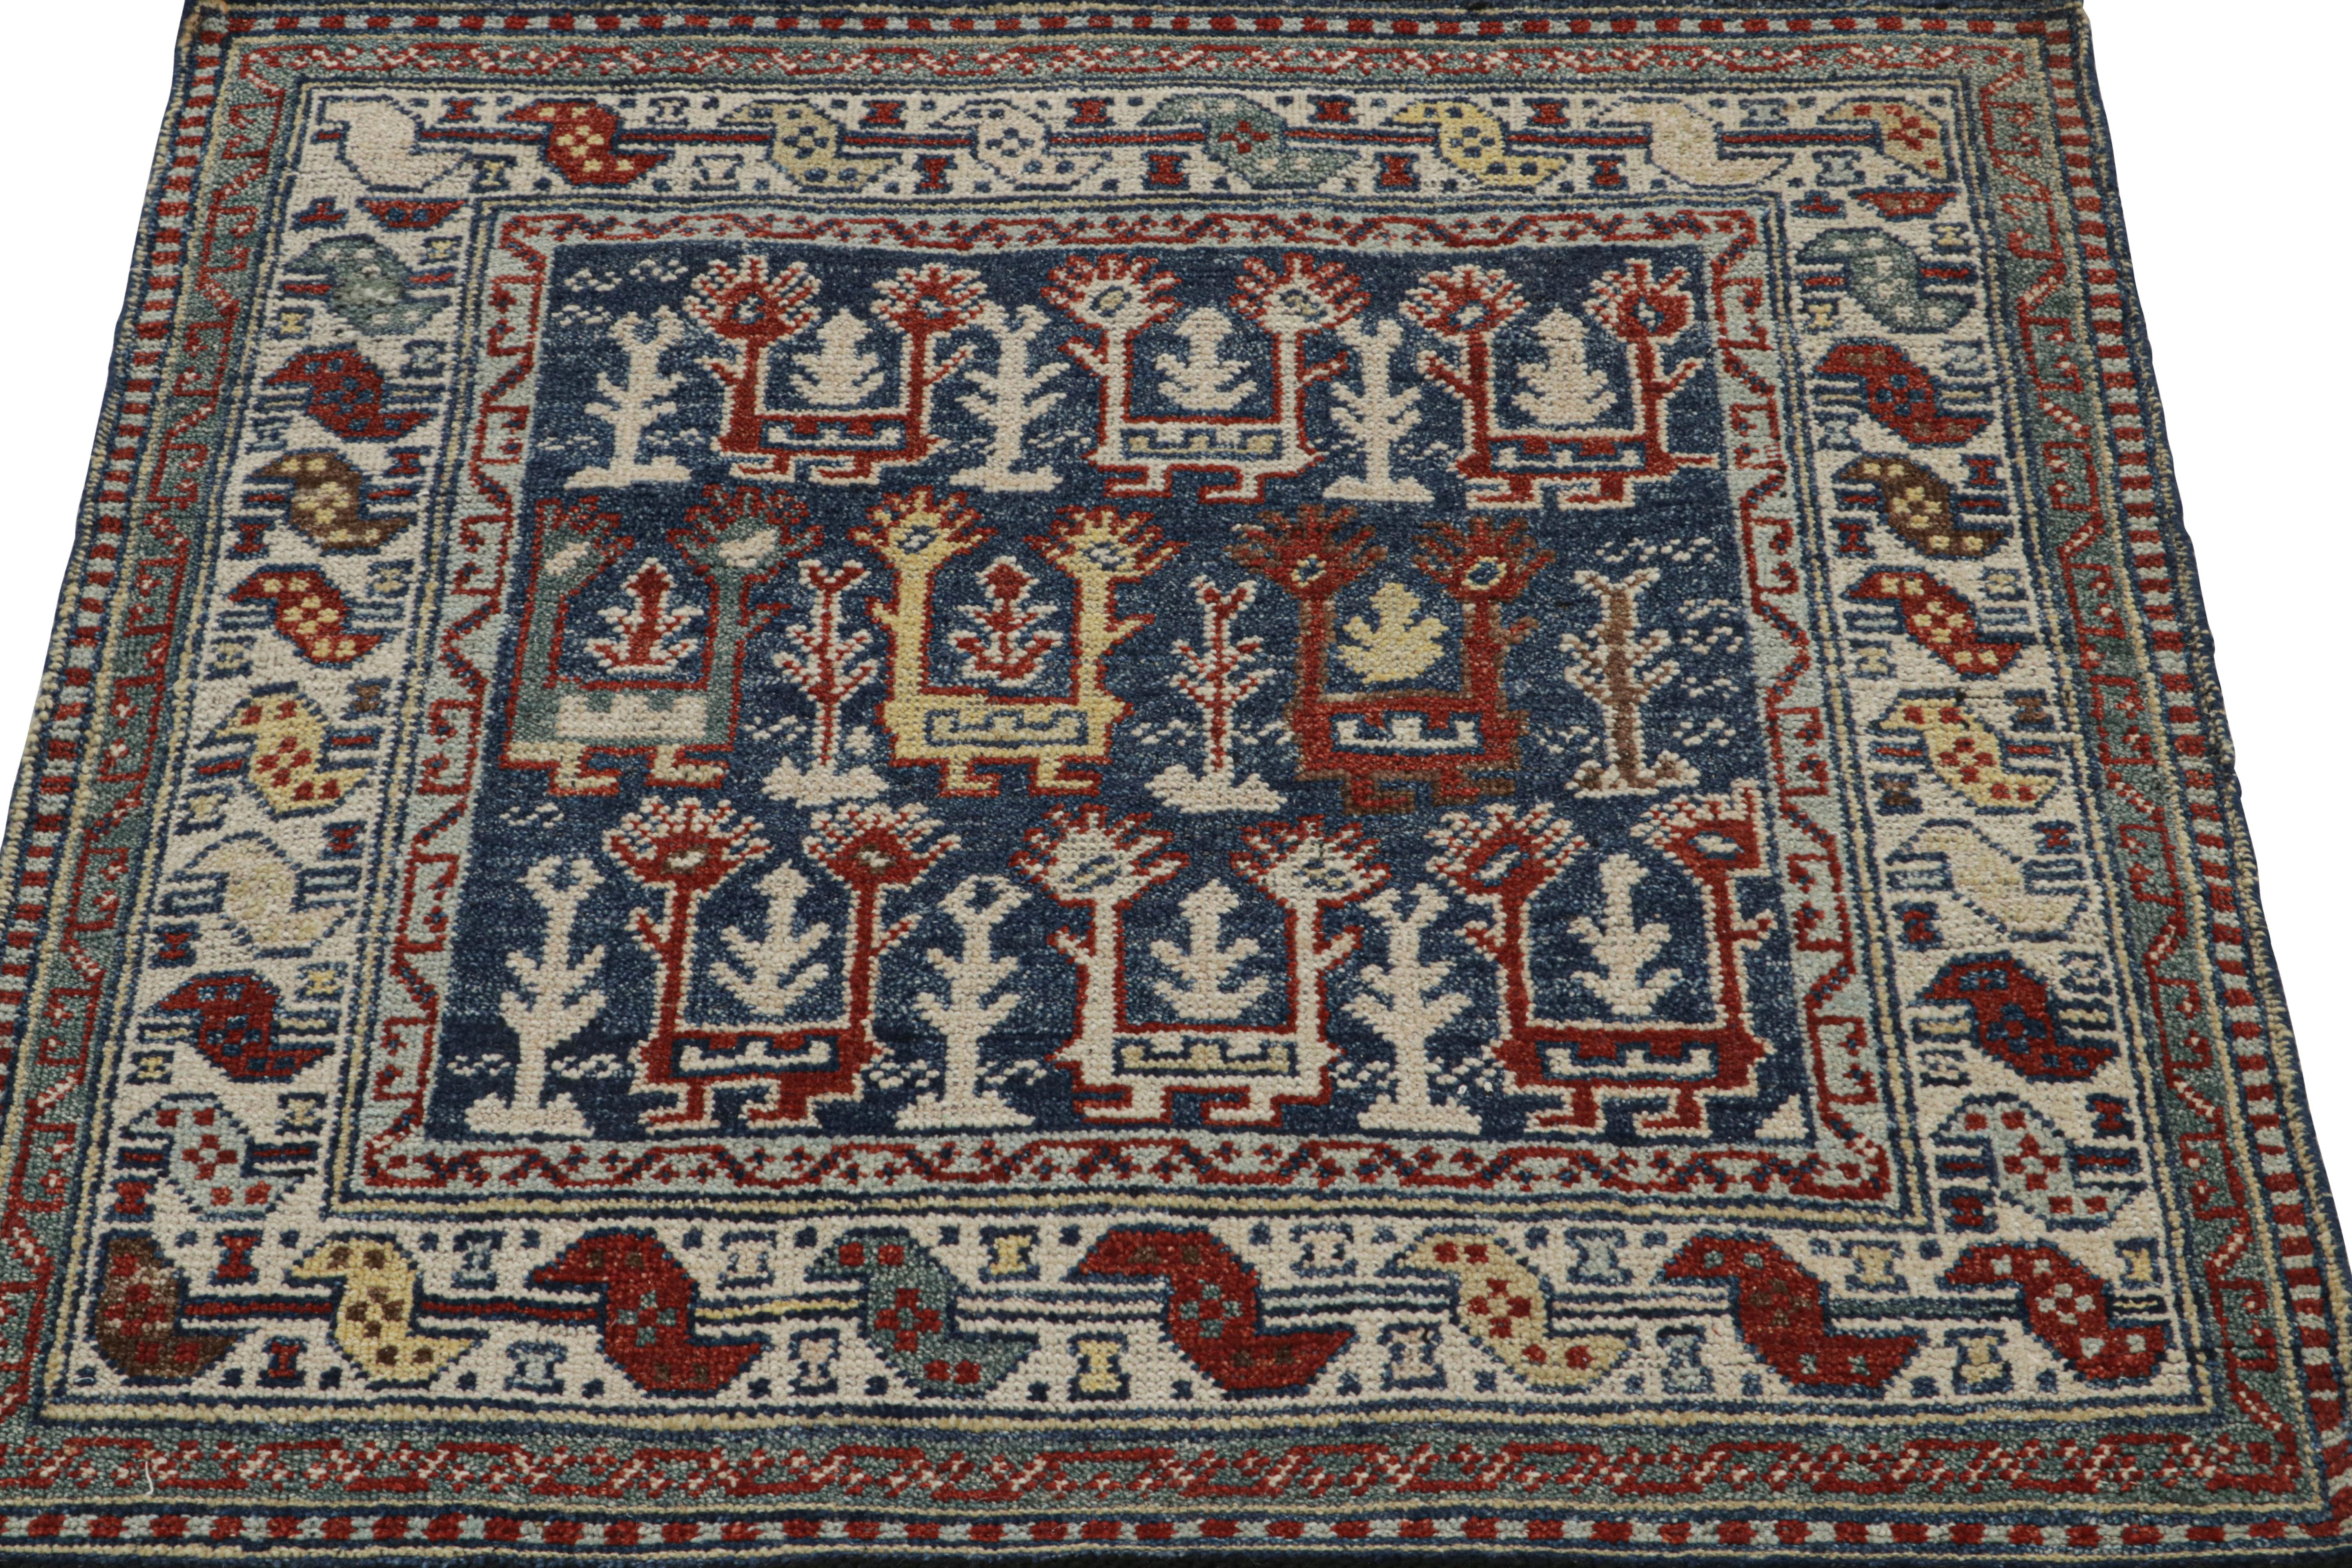 Indian Rug & Kilim’s Blue Tribal Style Square Rug with Primitivist Geometric Patterns For Sale